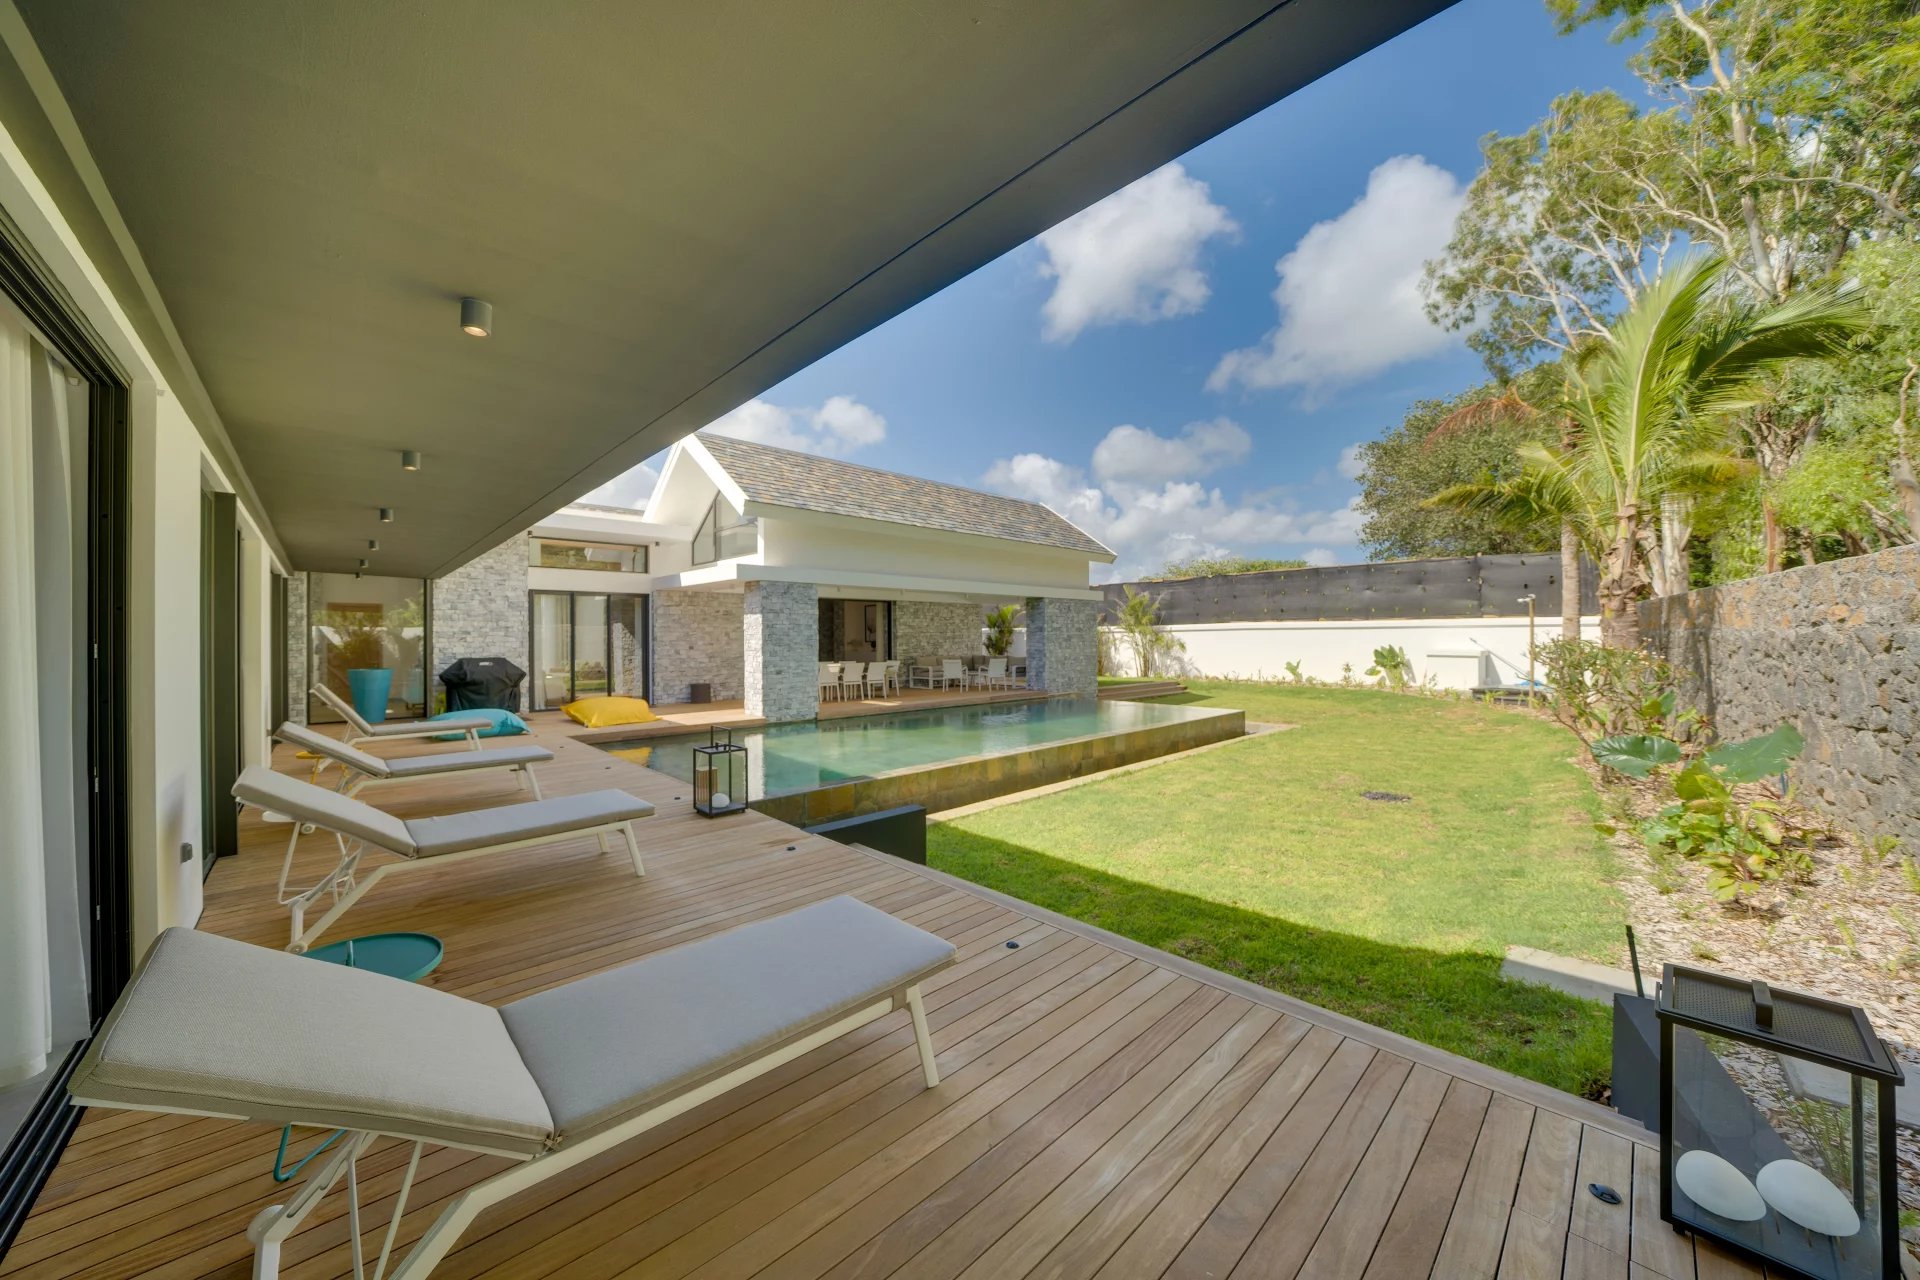 PEREYBERE - Villa a few steps from the beach - 4 bedrooms